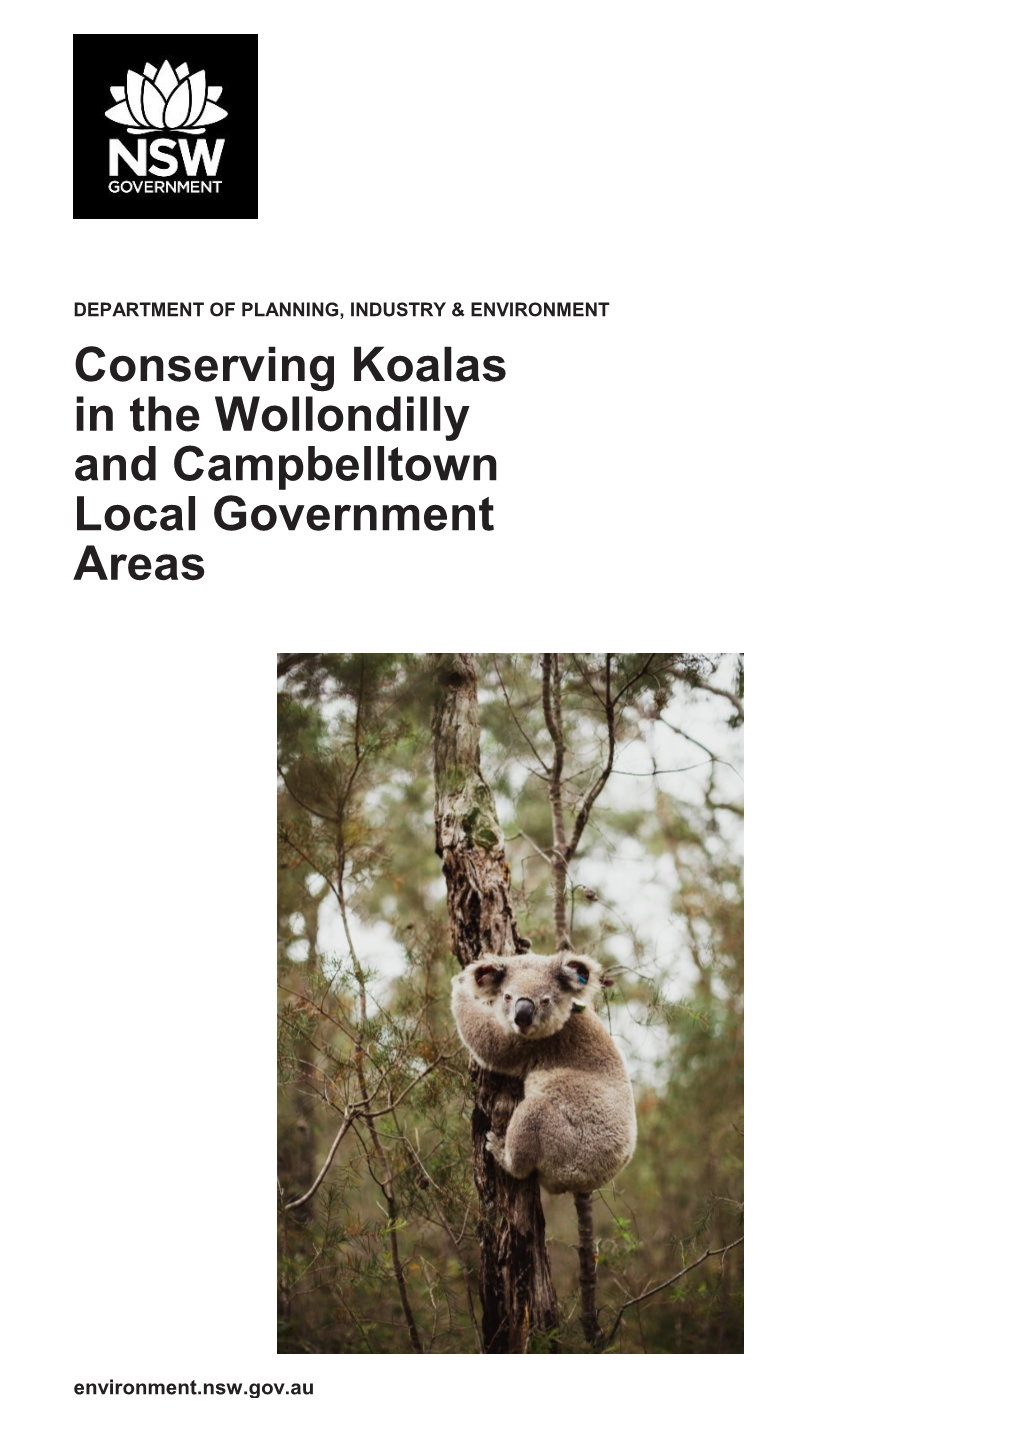 Conserving Koalas in the Wollondilly and Campbelltown Local Government Areas